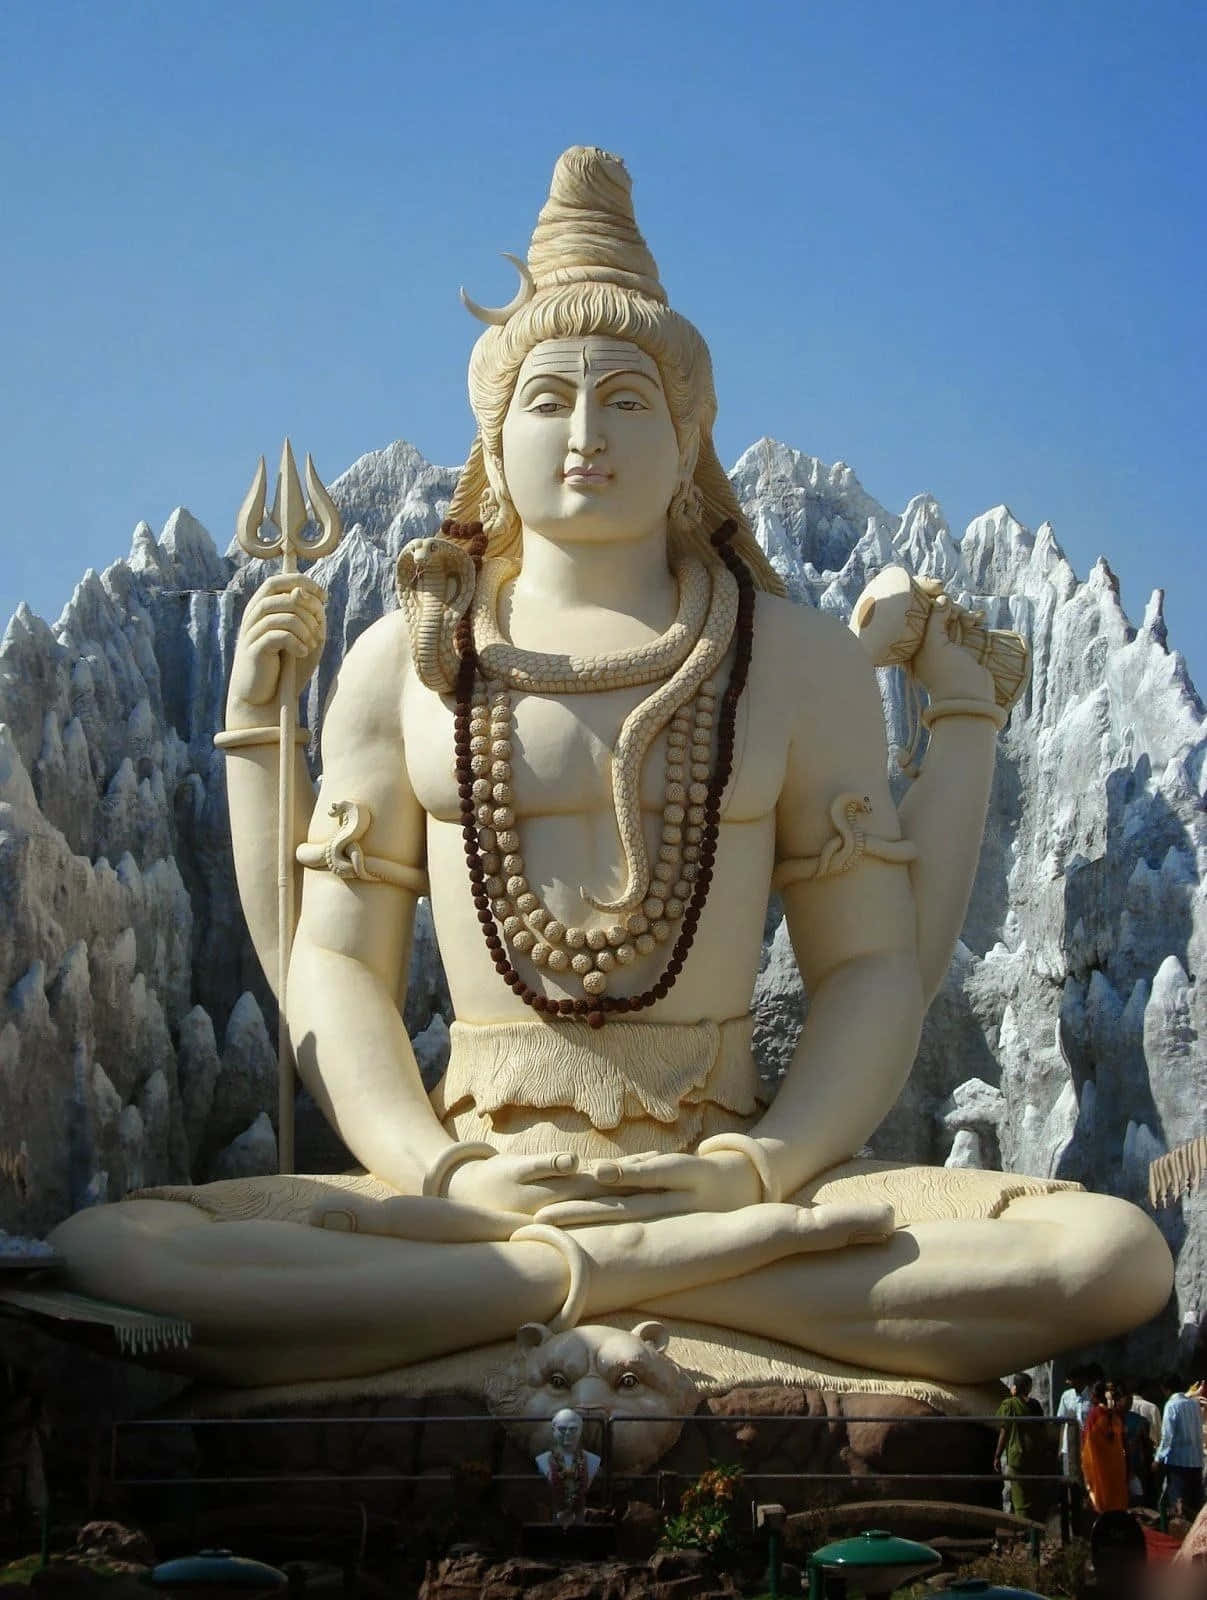 A Large Statue Of Lord Shiva In Front Of A Mountain